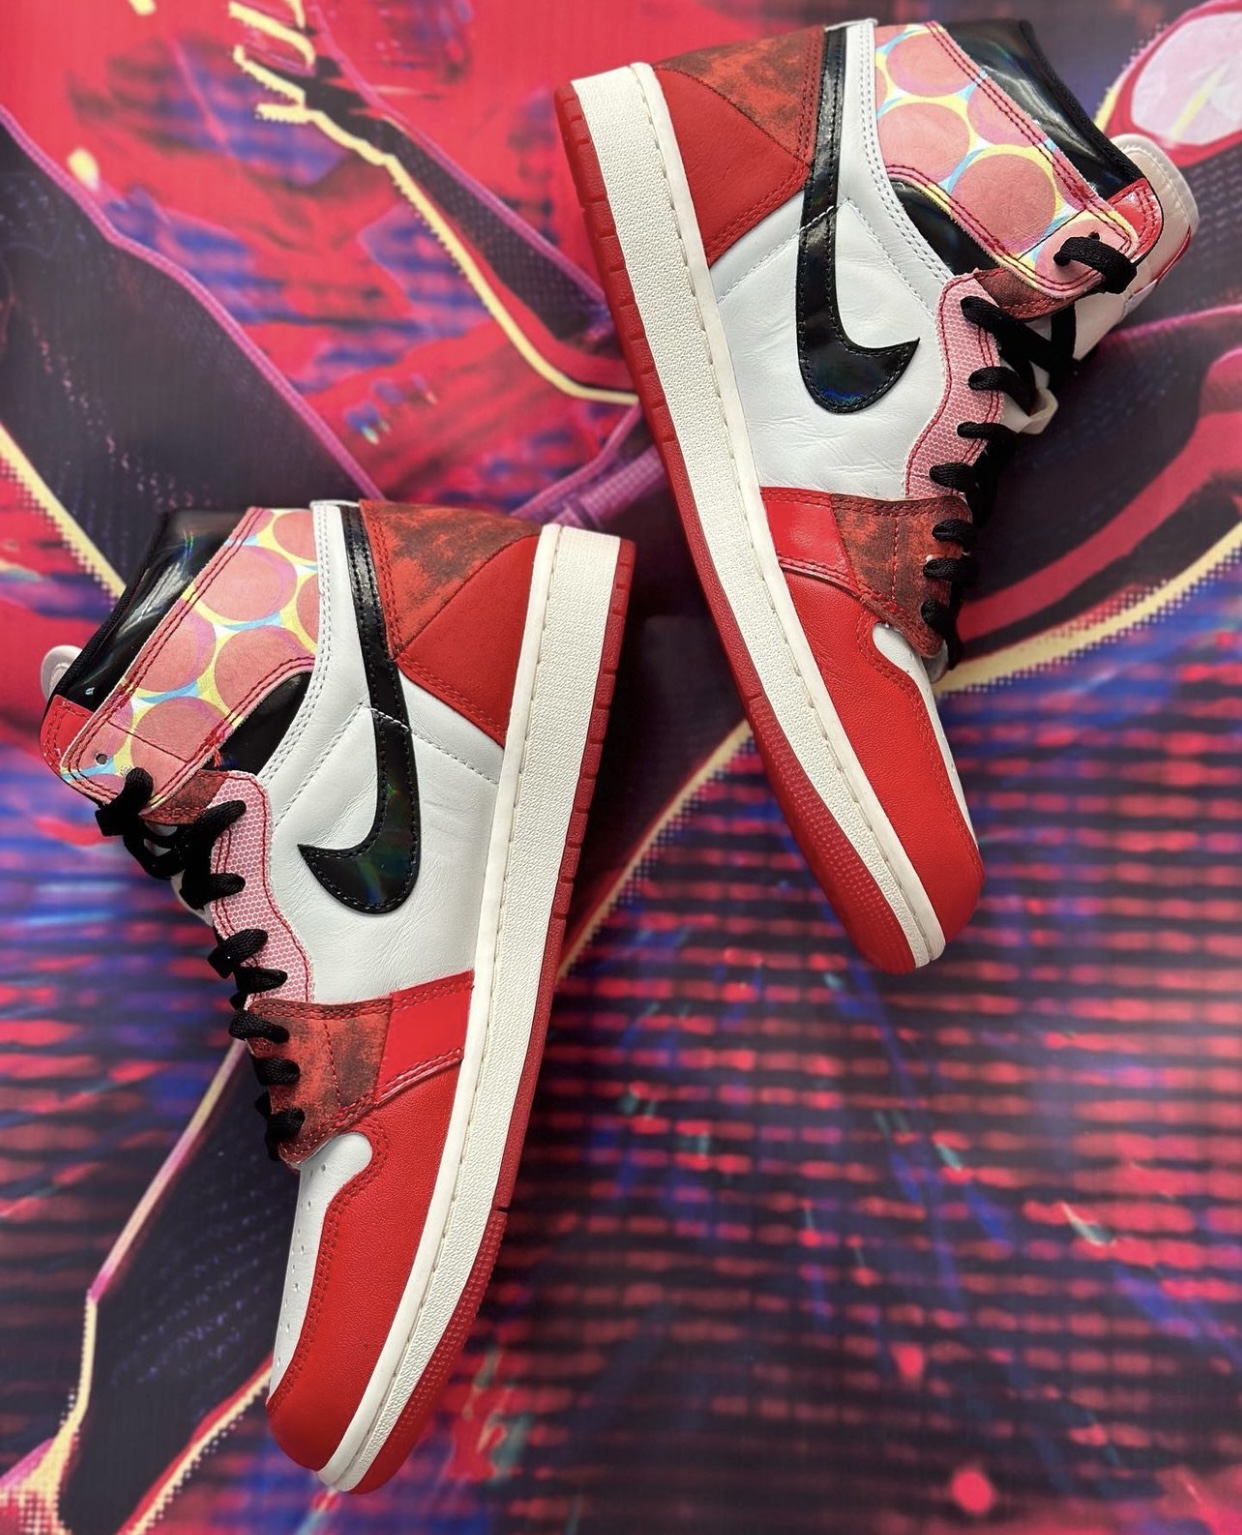 THE AIR JORDAN 1 HIGH OG “SPIDER-VERSE” Can be AVAILABLE ON STOCKXSHOES Soon 